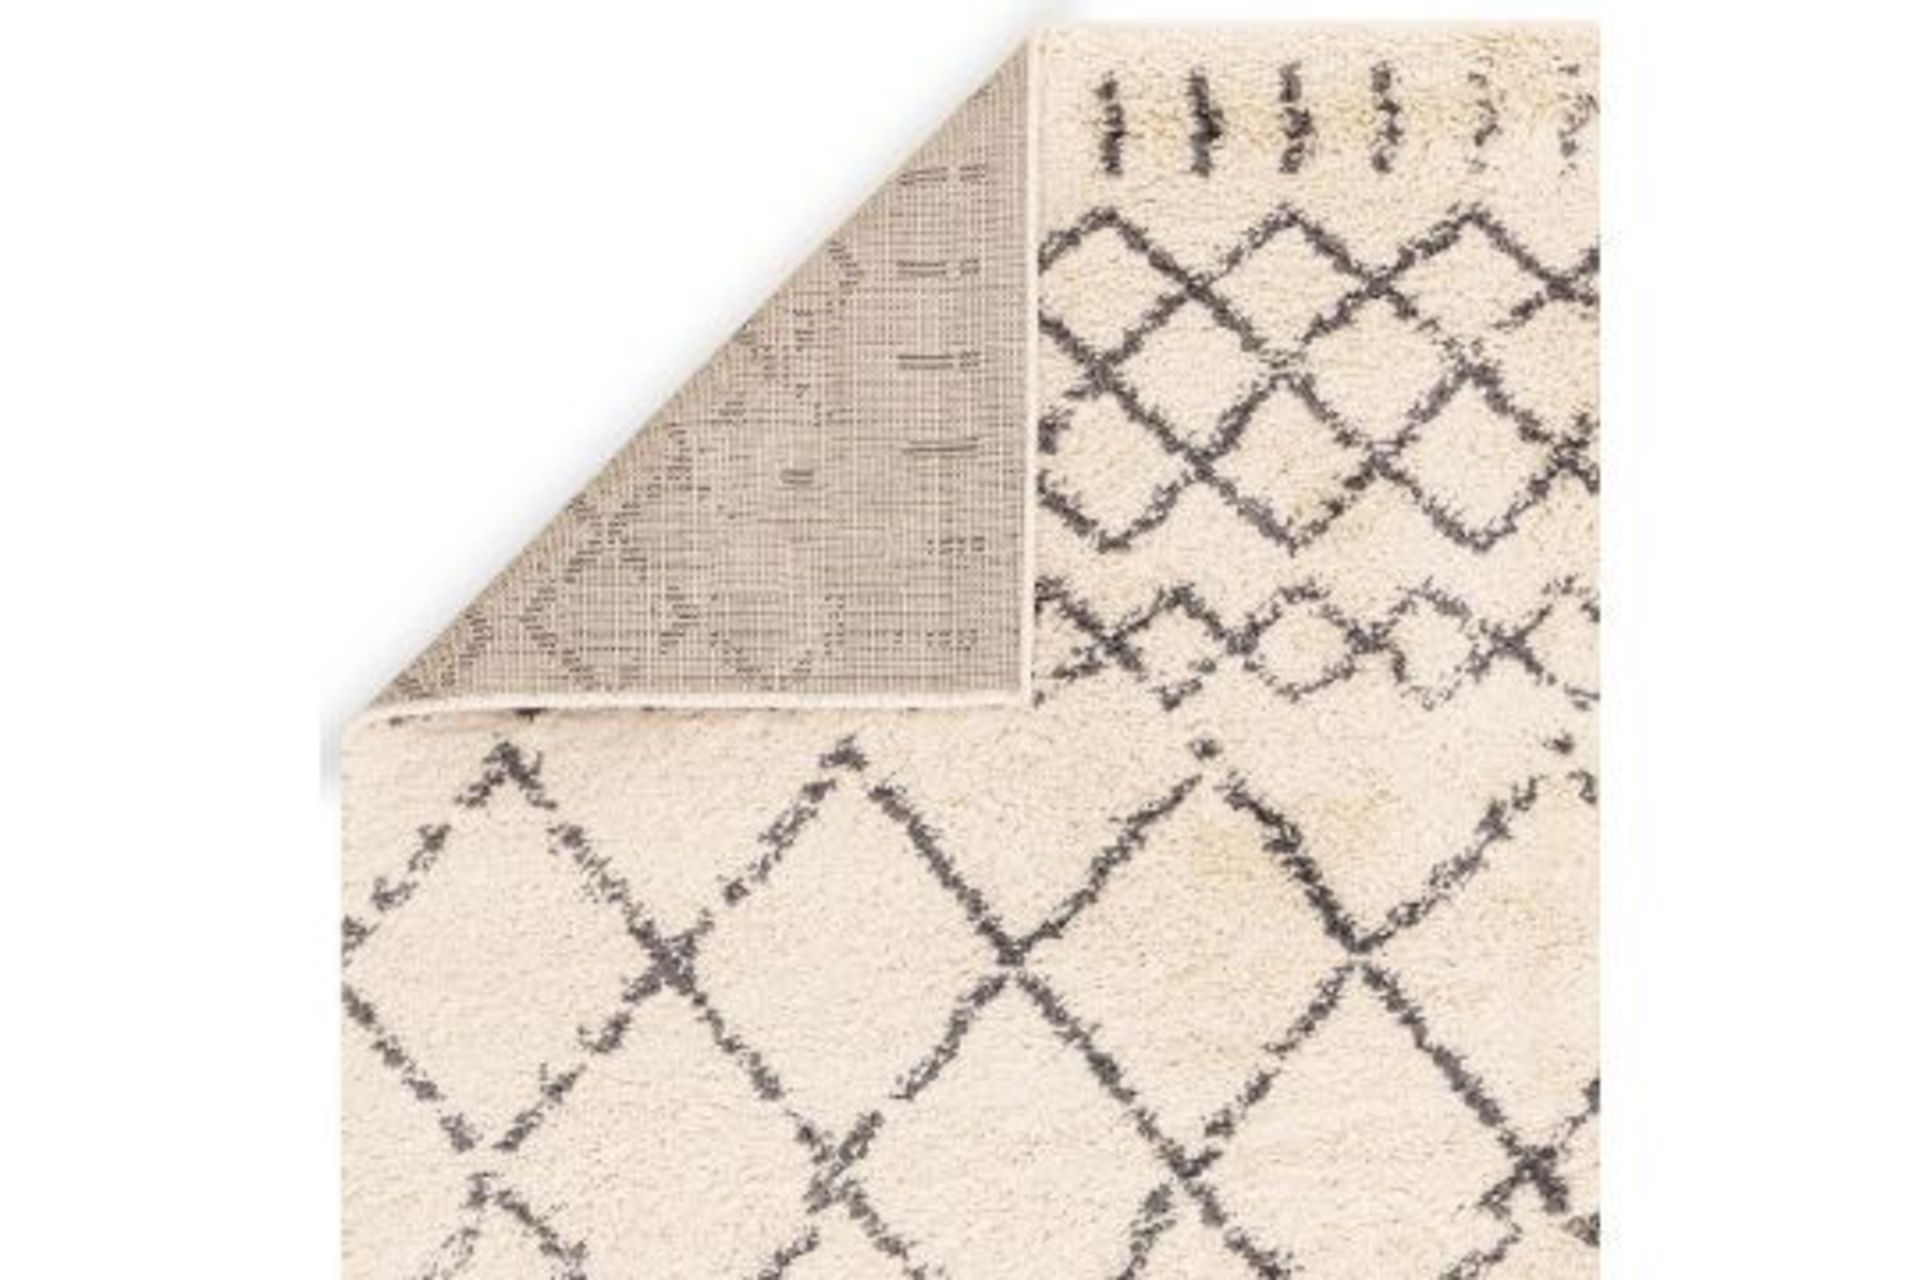 New Nordic 110x160cm Cream & Charcoal - 100% Polypropylene Rug - £10 Delivery - Image 3 of 3